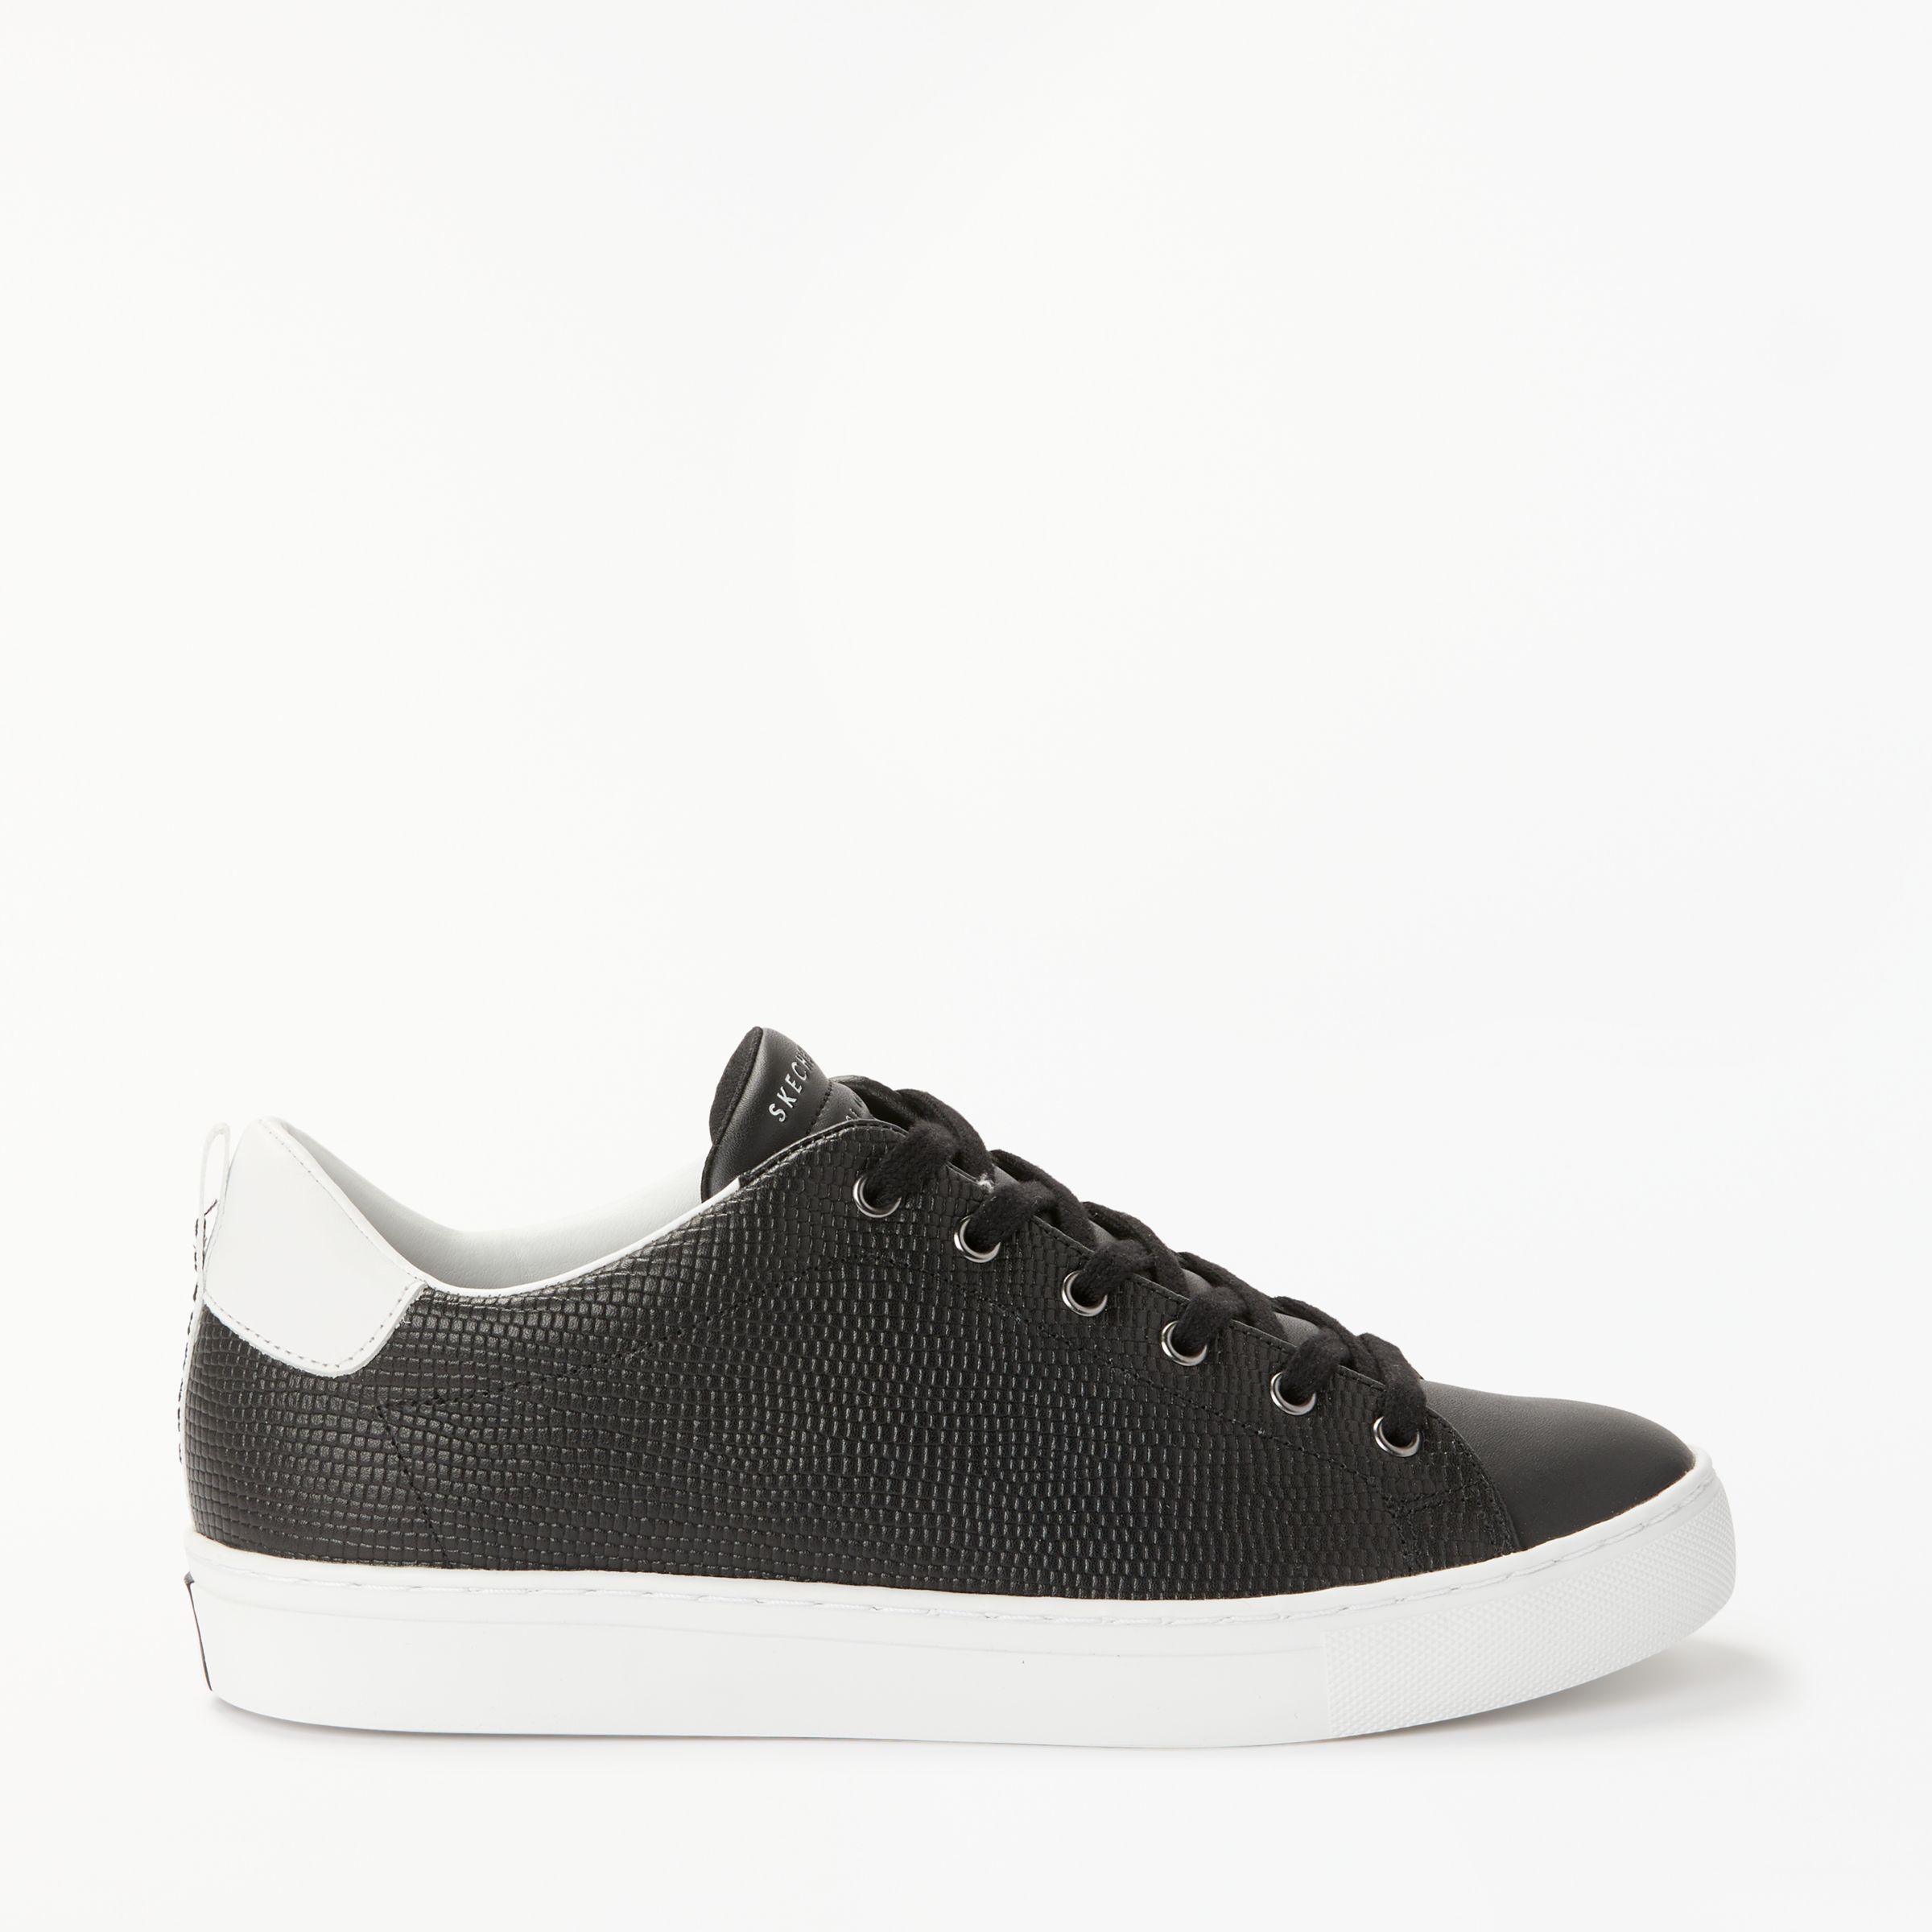 Skechers Side Street Tegu Lace Up Trainers, Black Leather